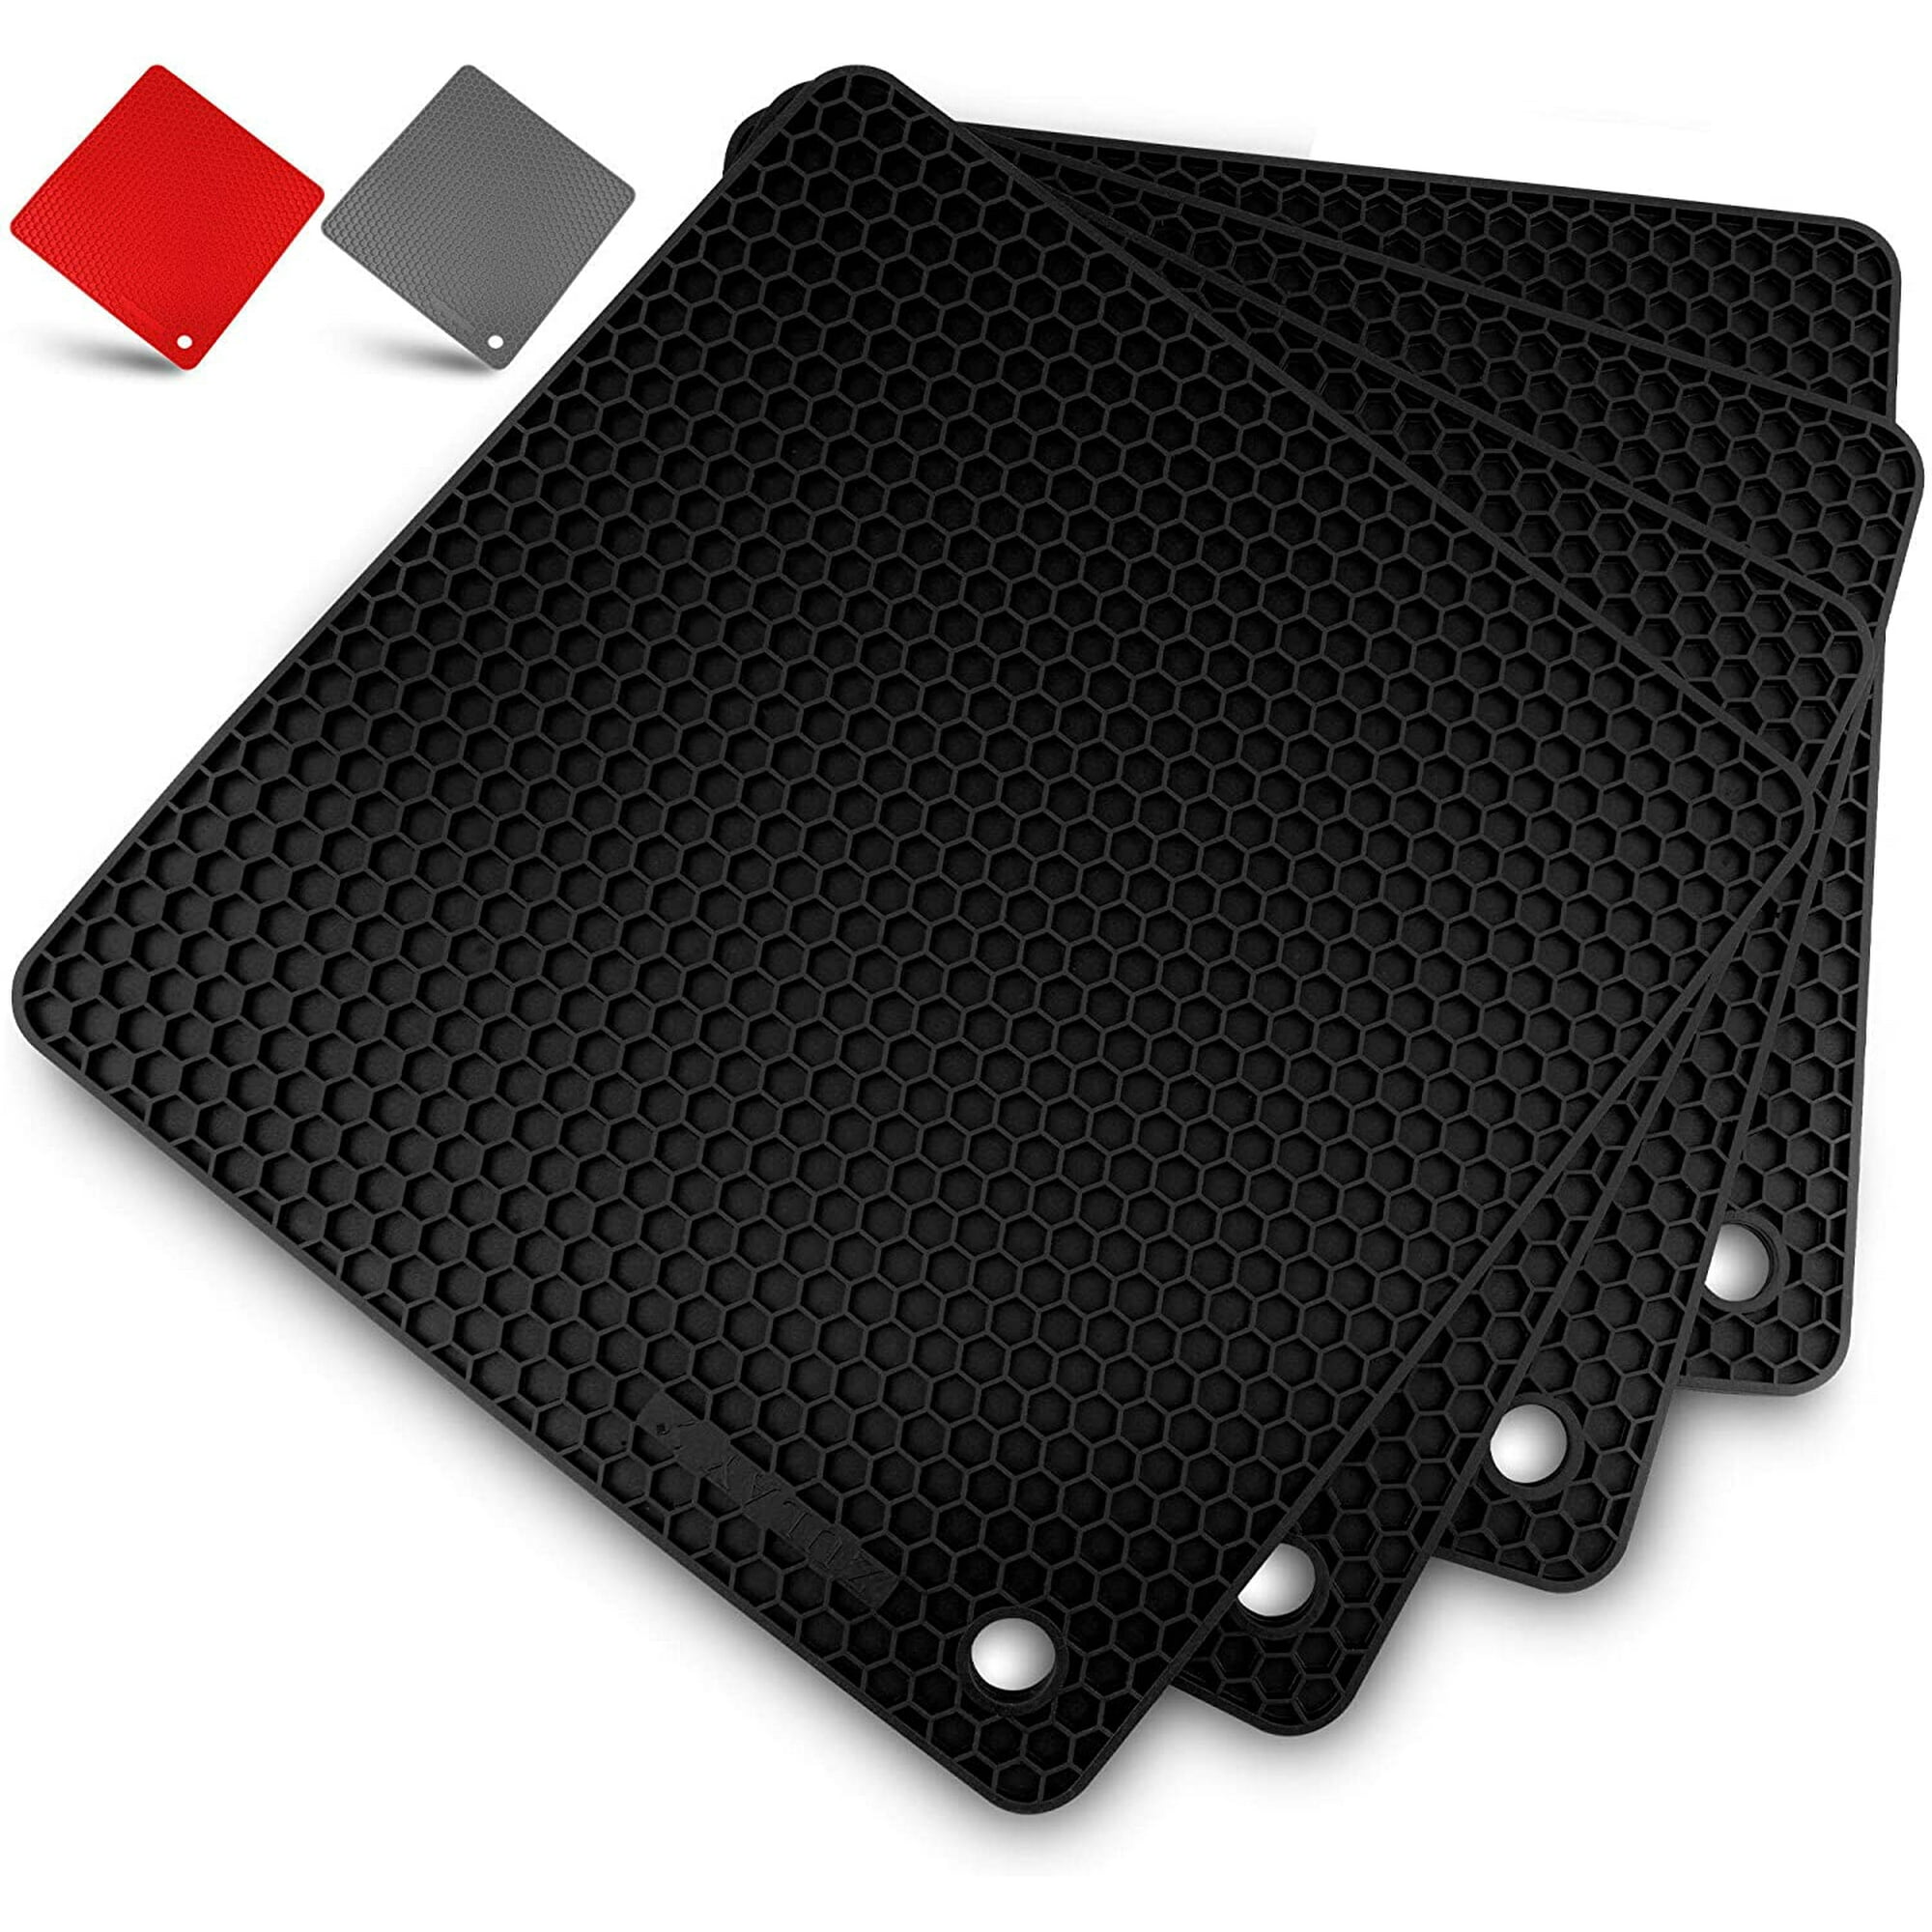 1/4 Pack Silicone Trivet Mat - 7”x7” Silicone Pot Holders For Kitchen &  Table - Non Slip Silicone Hot Pad & Coasters - Flexible Silicone Heat  Resistant Mat For Countertop 